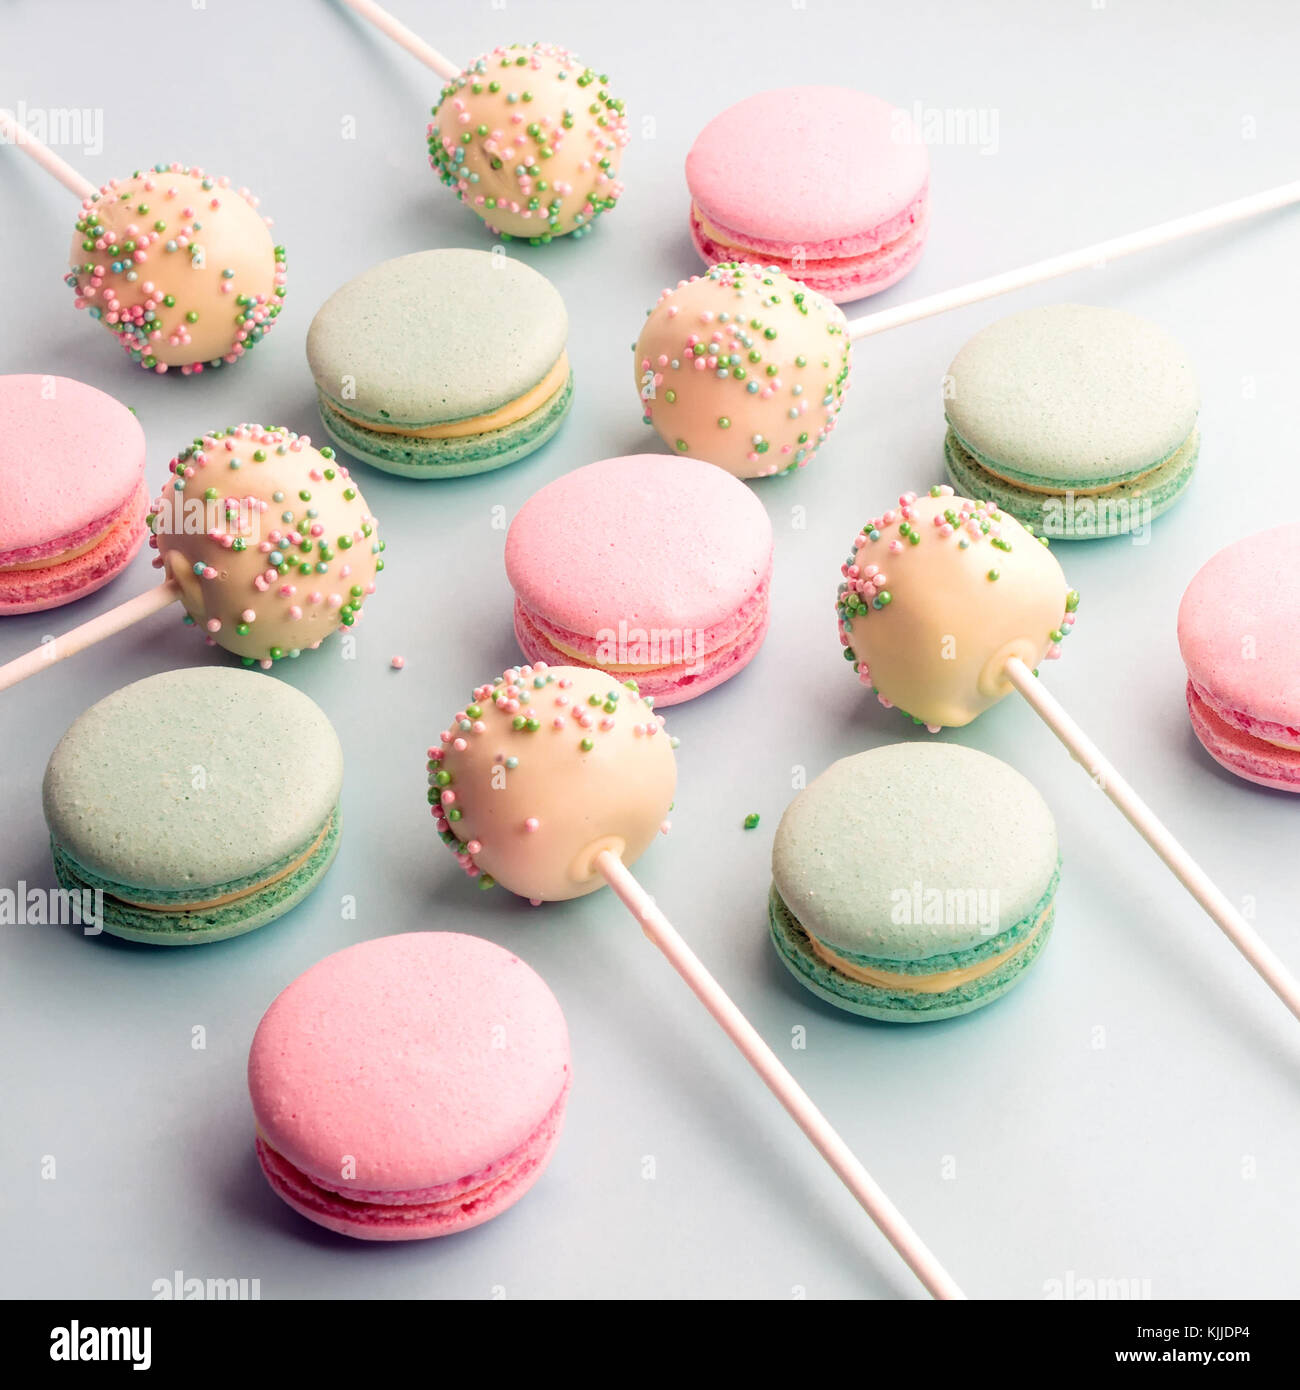 Background of colorful macaroons with cake pops Stock Photo